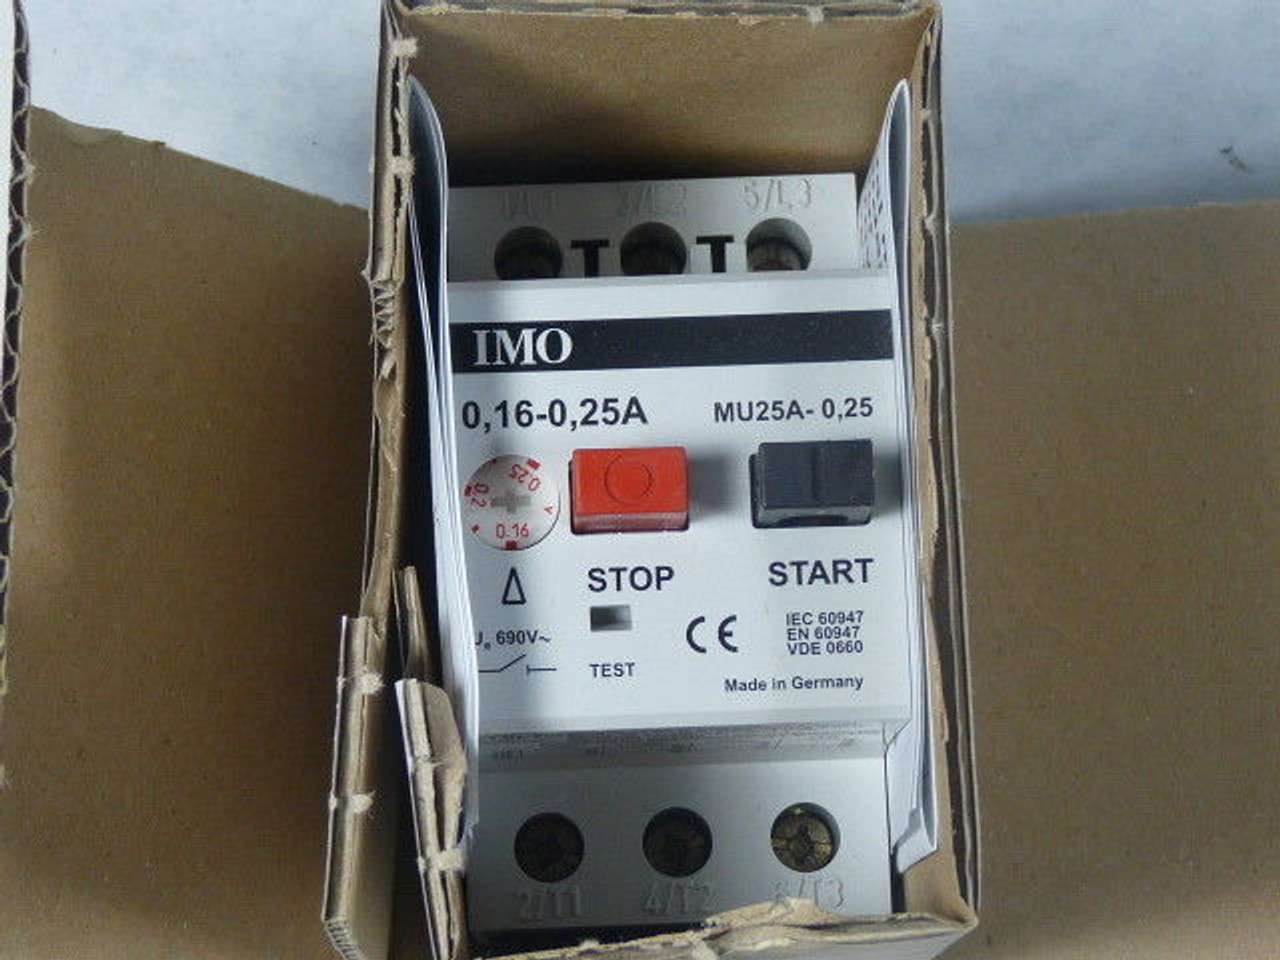 IMO MU25A-0.25 Thermal Manual Motor Stater 0.16-0.25A ! NEW !